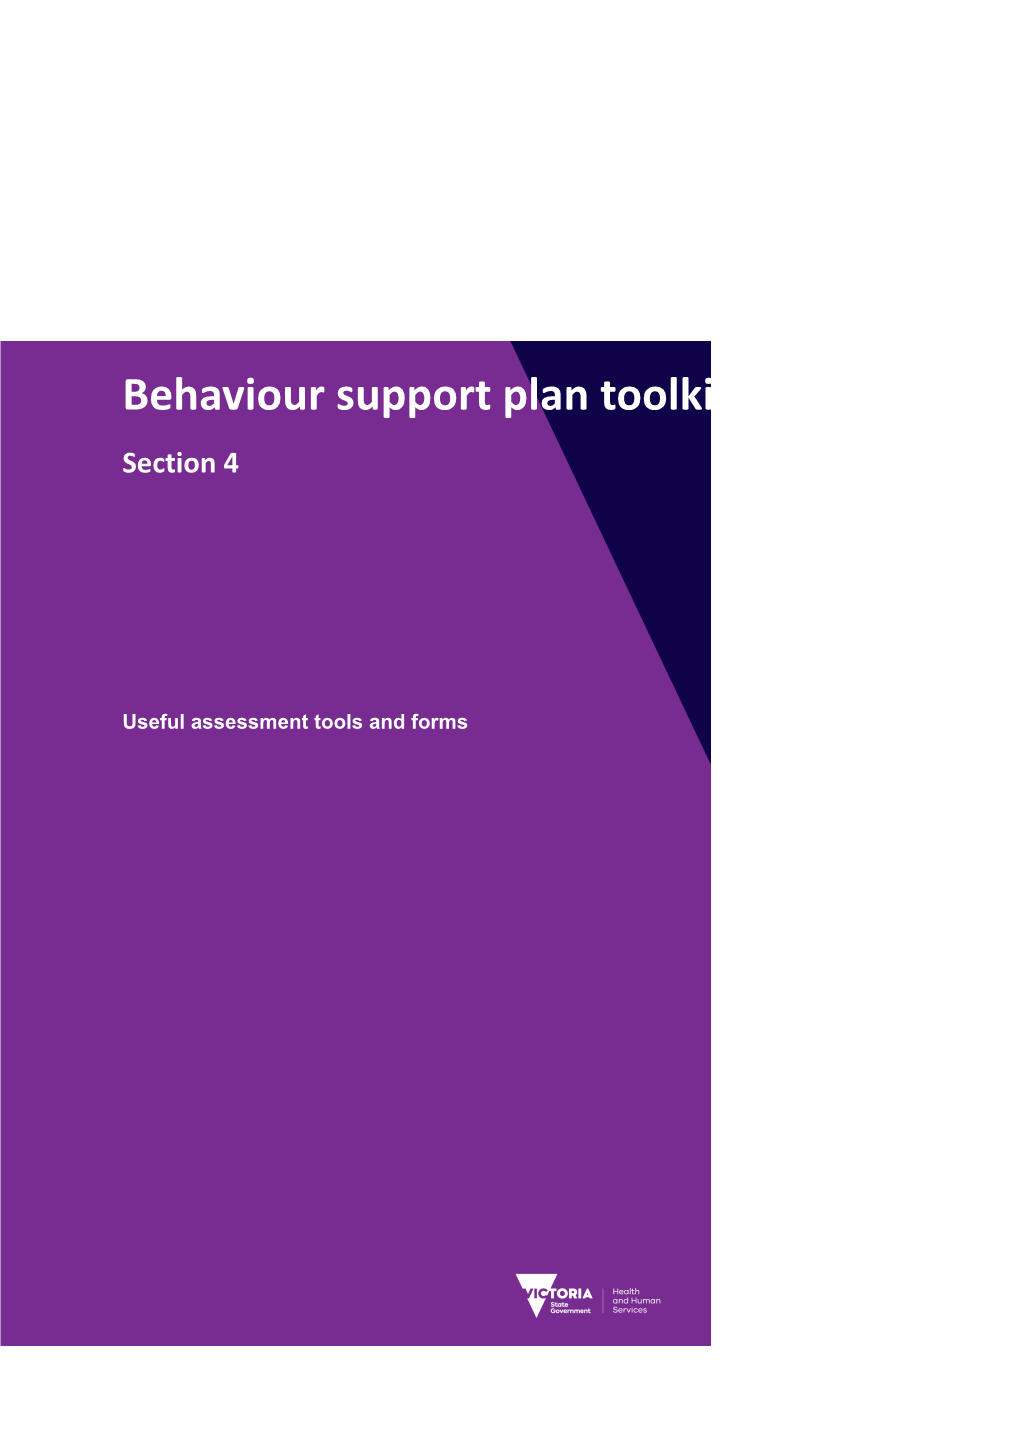 New Toolkit Section 4 - Behaviour Support Plan Useful Assessment Tools and Forms